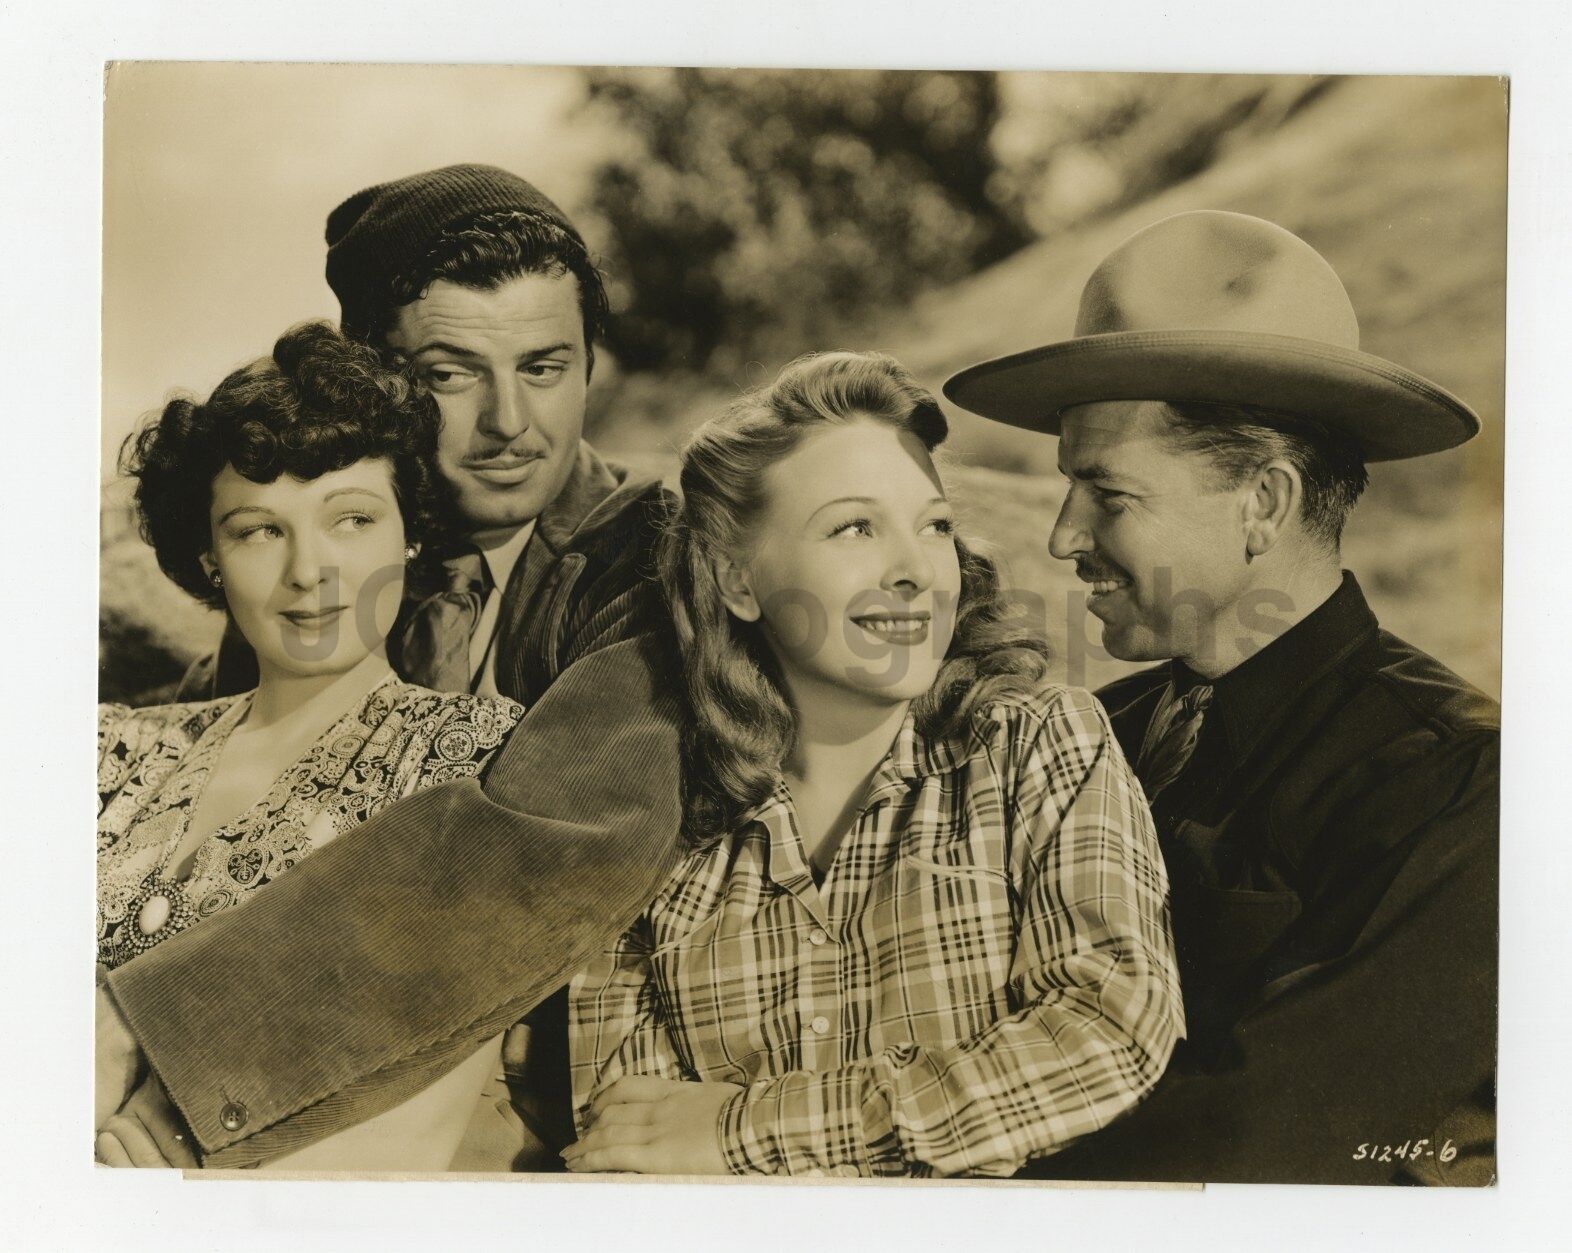 Pierre of the Plains - John Carroll - Ruth Hussey - Vintage 7x9 Photo Poster paintinggraph